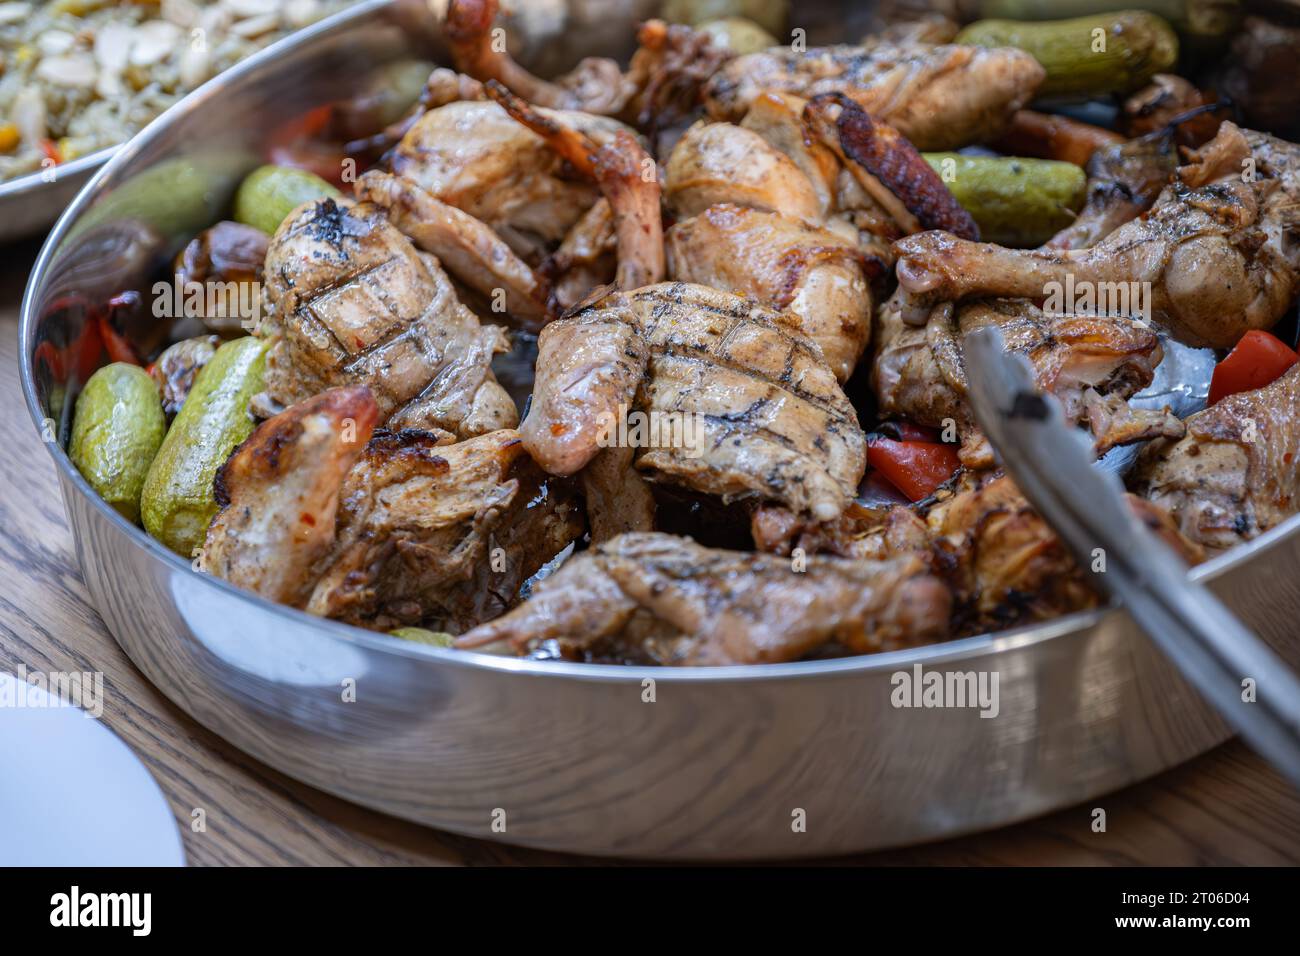 Chicken and rice on dinner table well prepared and served Stock Photo